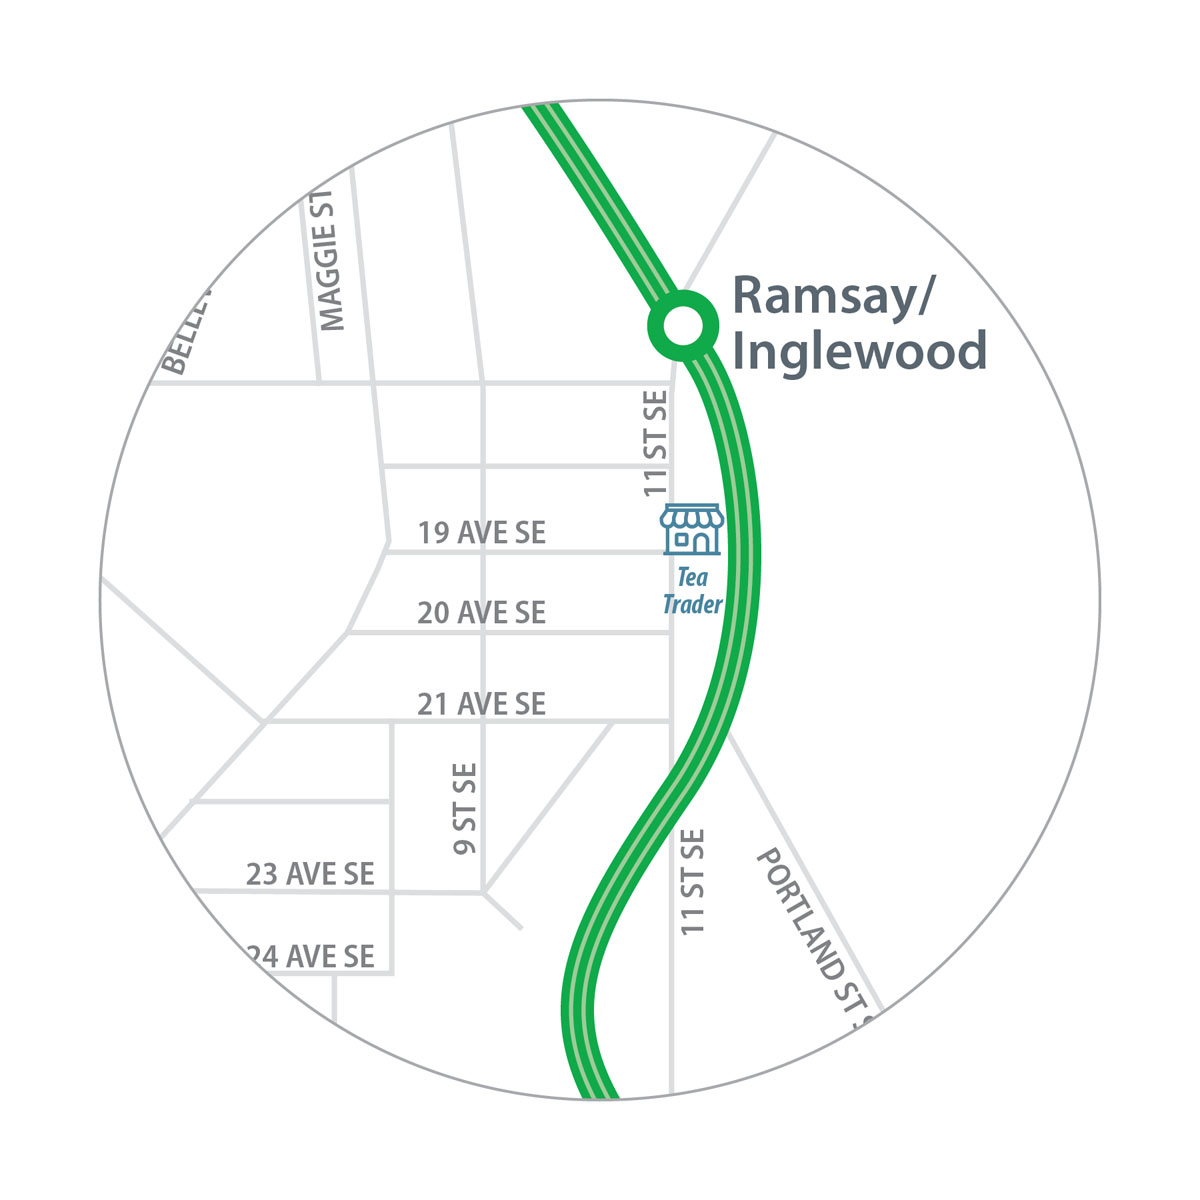 Map of Tea Trader location in relation to Ramsay/Inglewood Station.